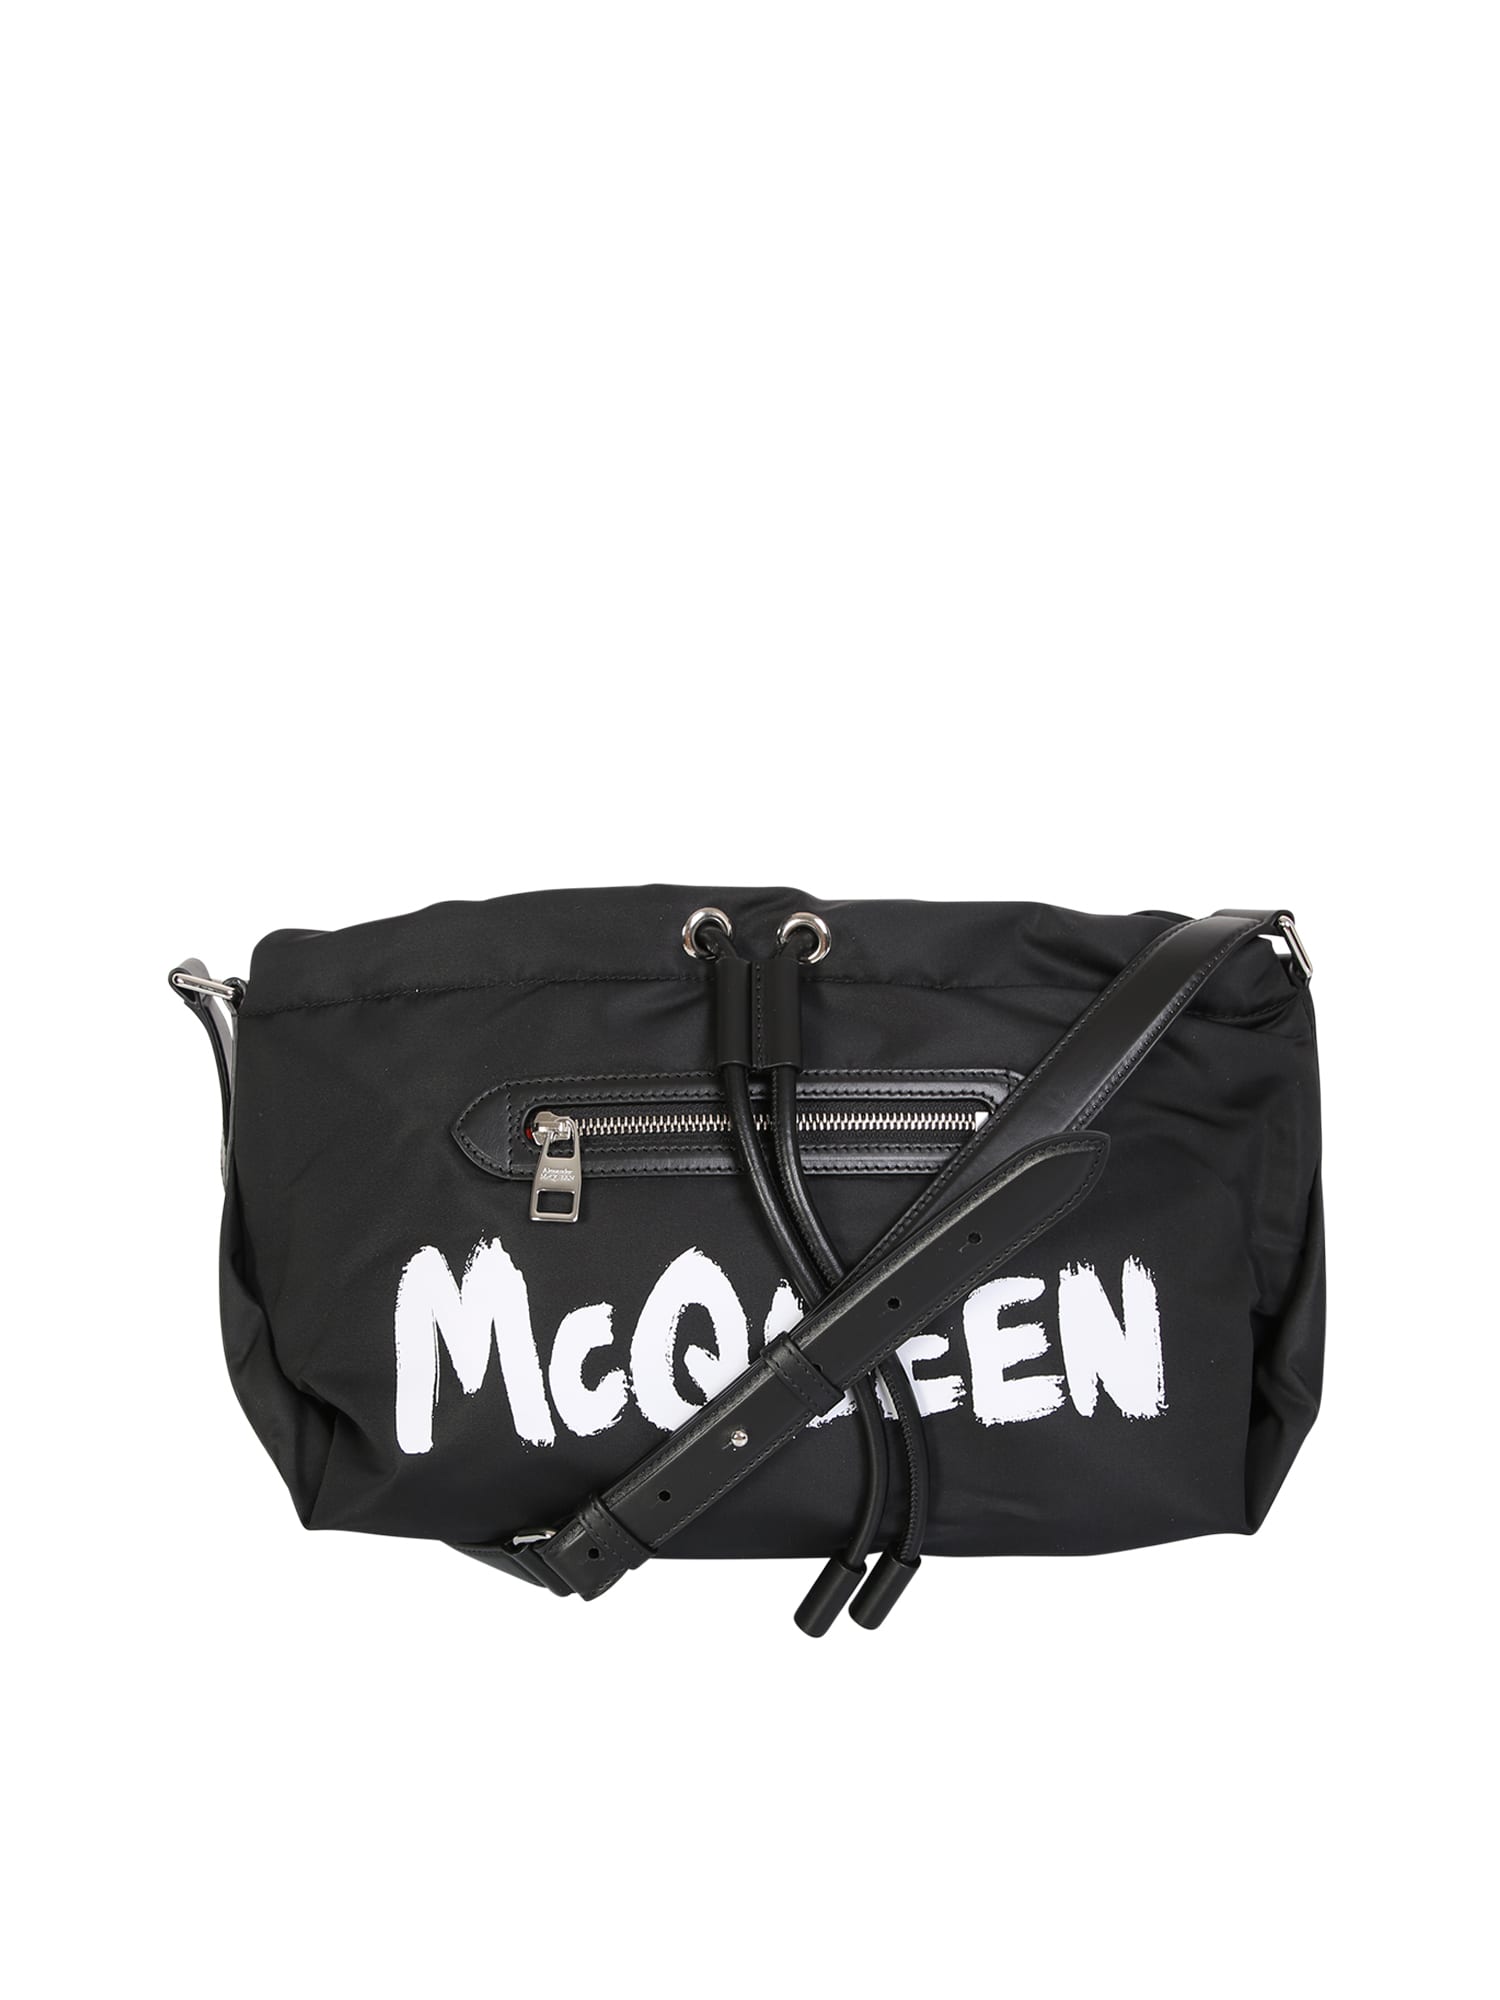 Alexander McQueen Graffiti Bag With Iconic Alexander Mcqueen Printed Logo. Practical And Comfortable, It Can Be Adapted To Any Type Of Look